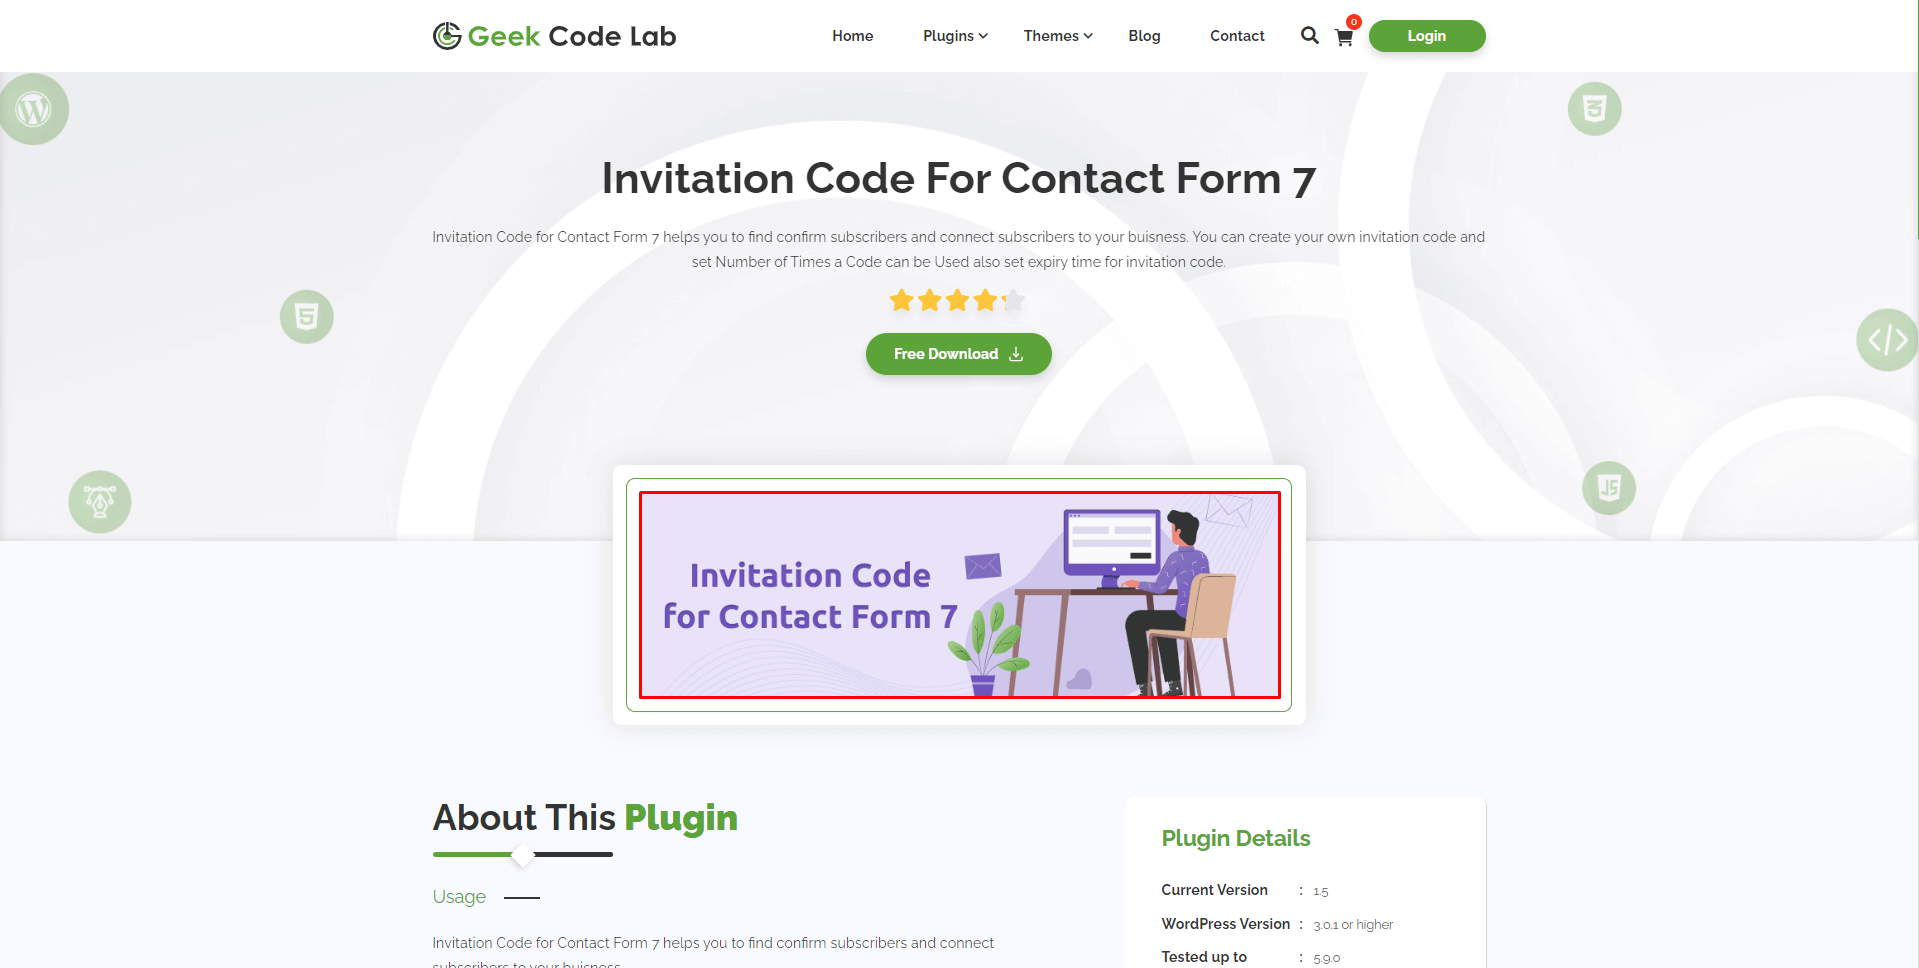 Invitation Code For Contact Form 7